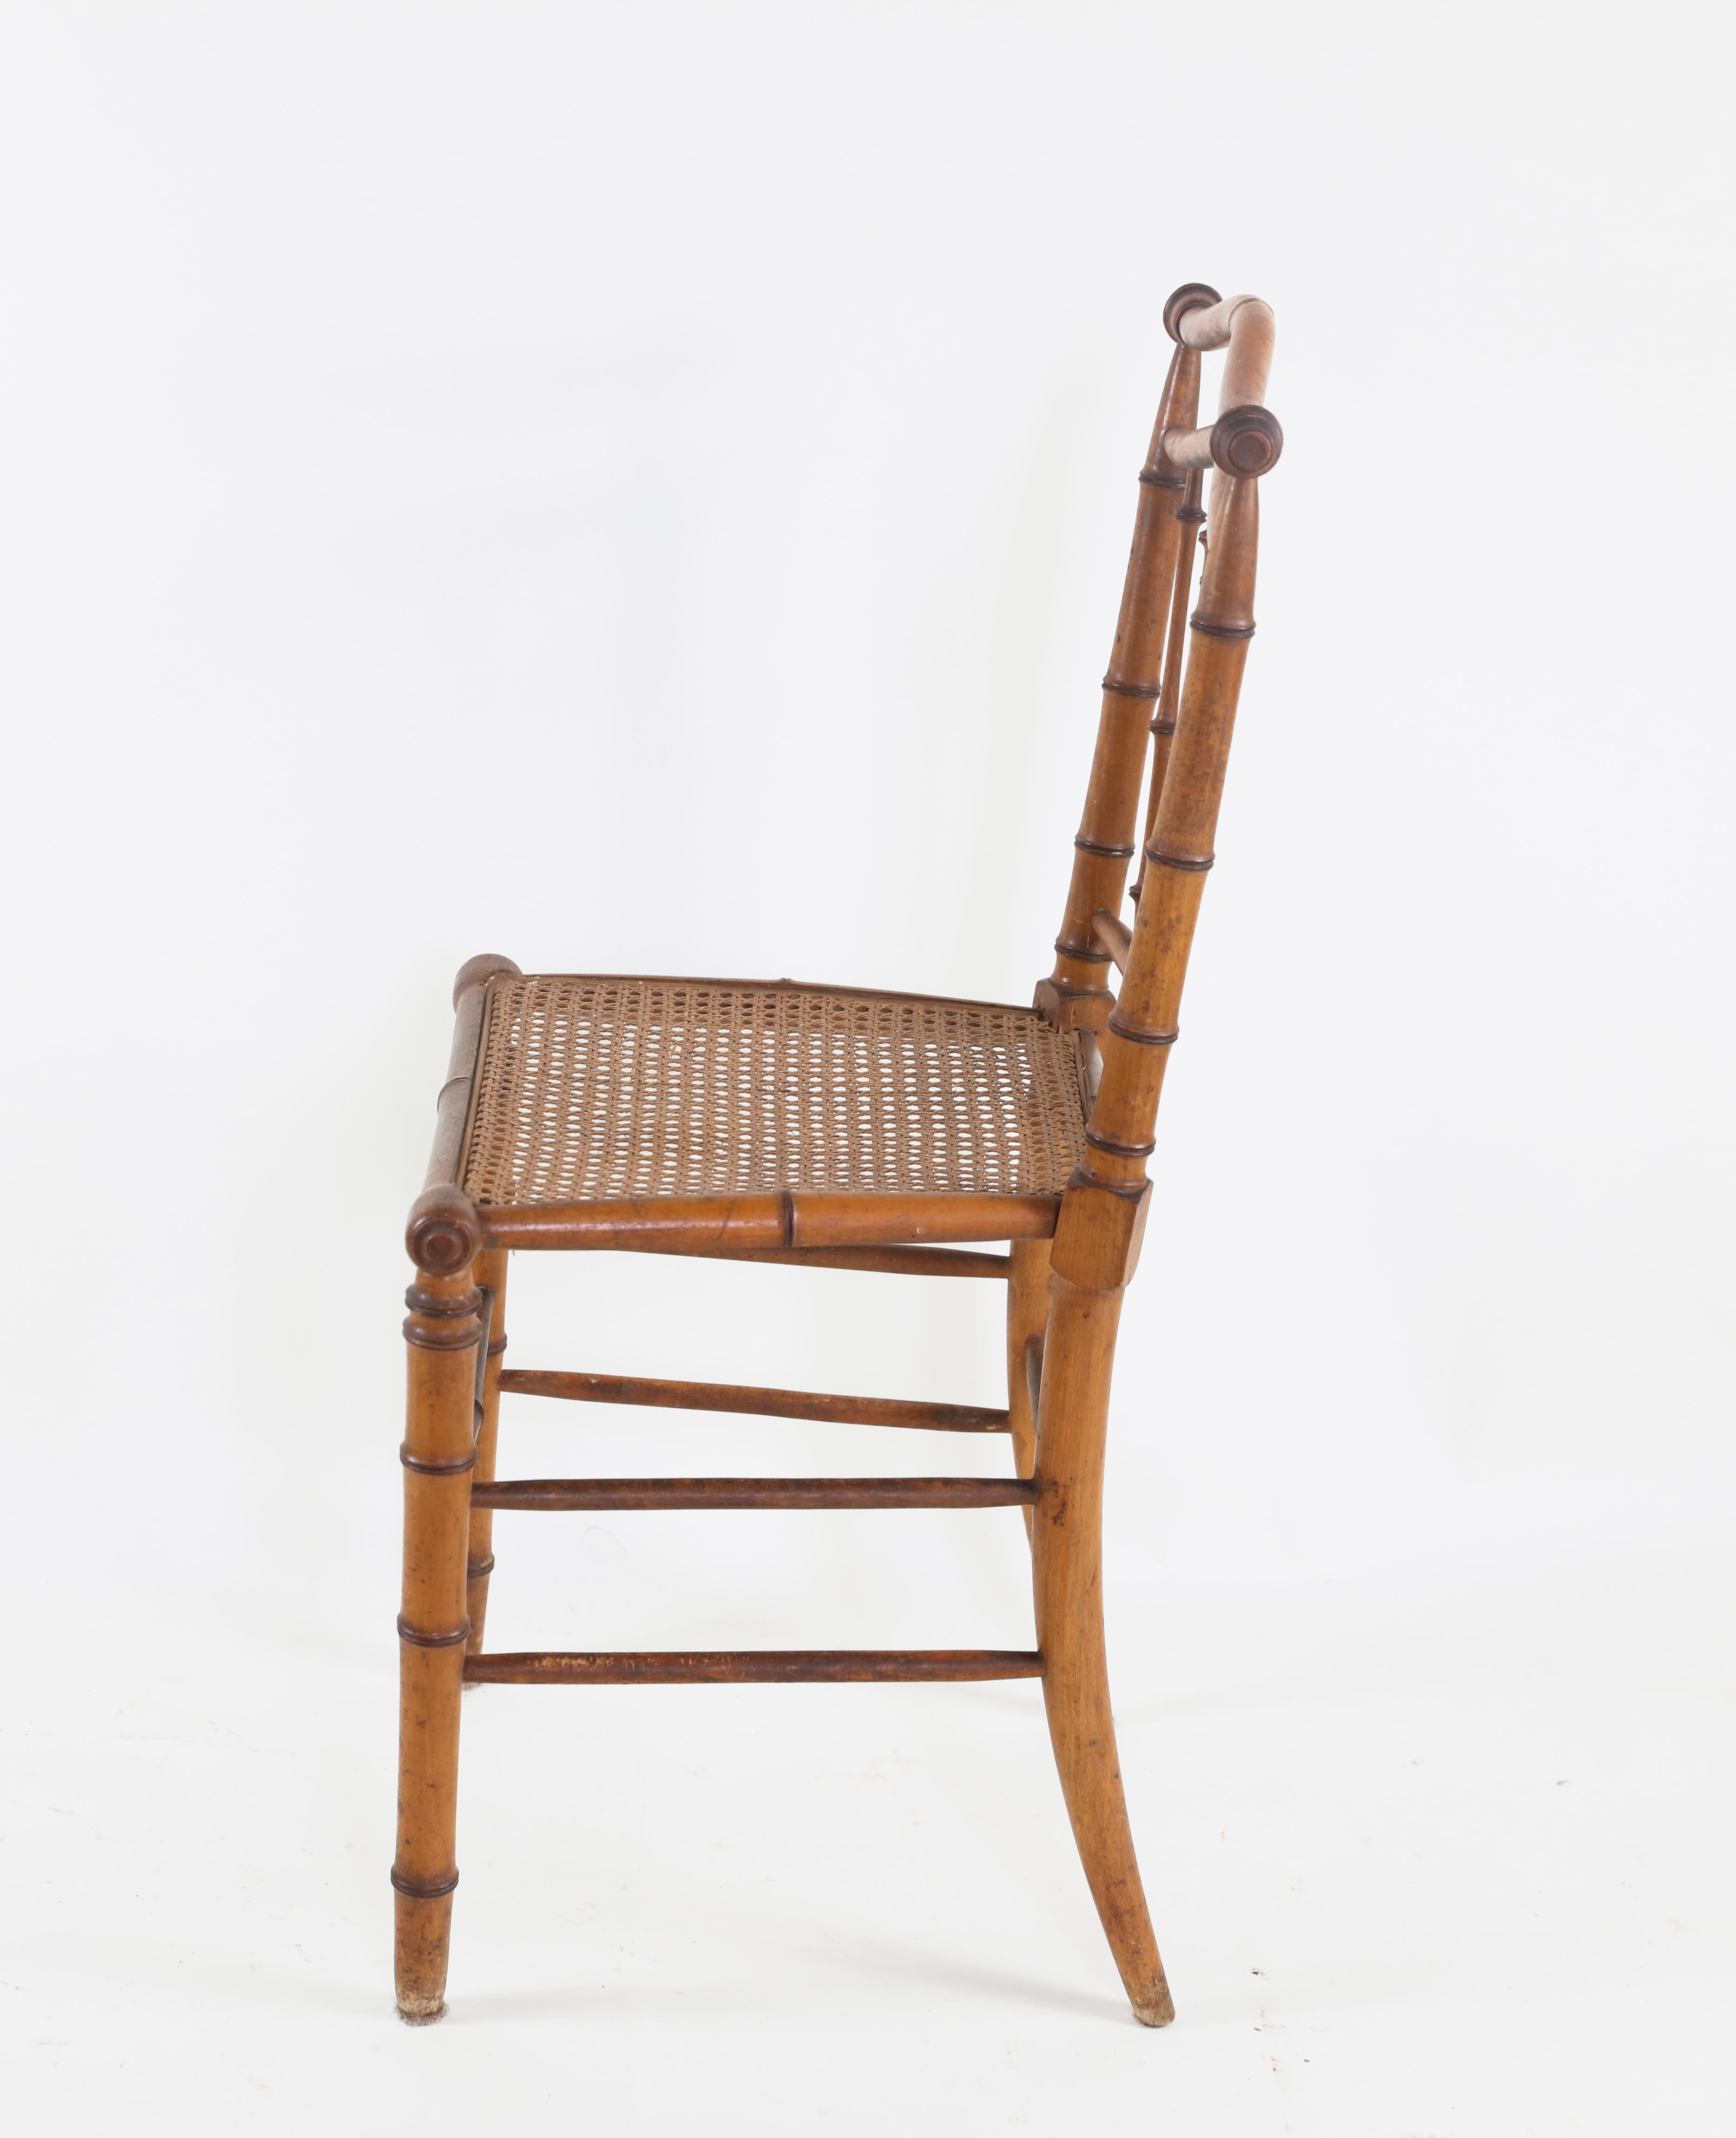 4 antique faux bamboo chairs

Measures: 33